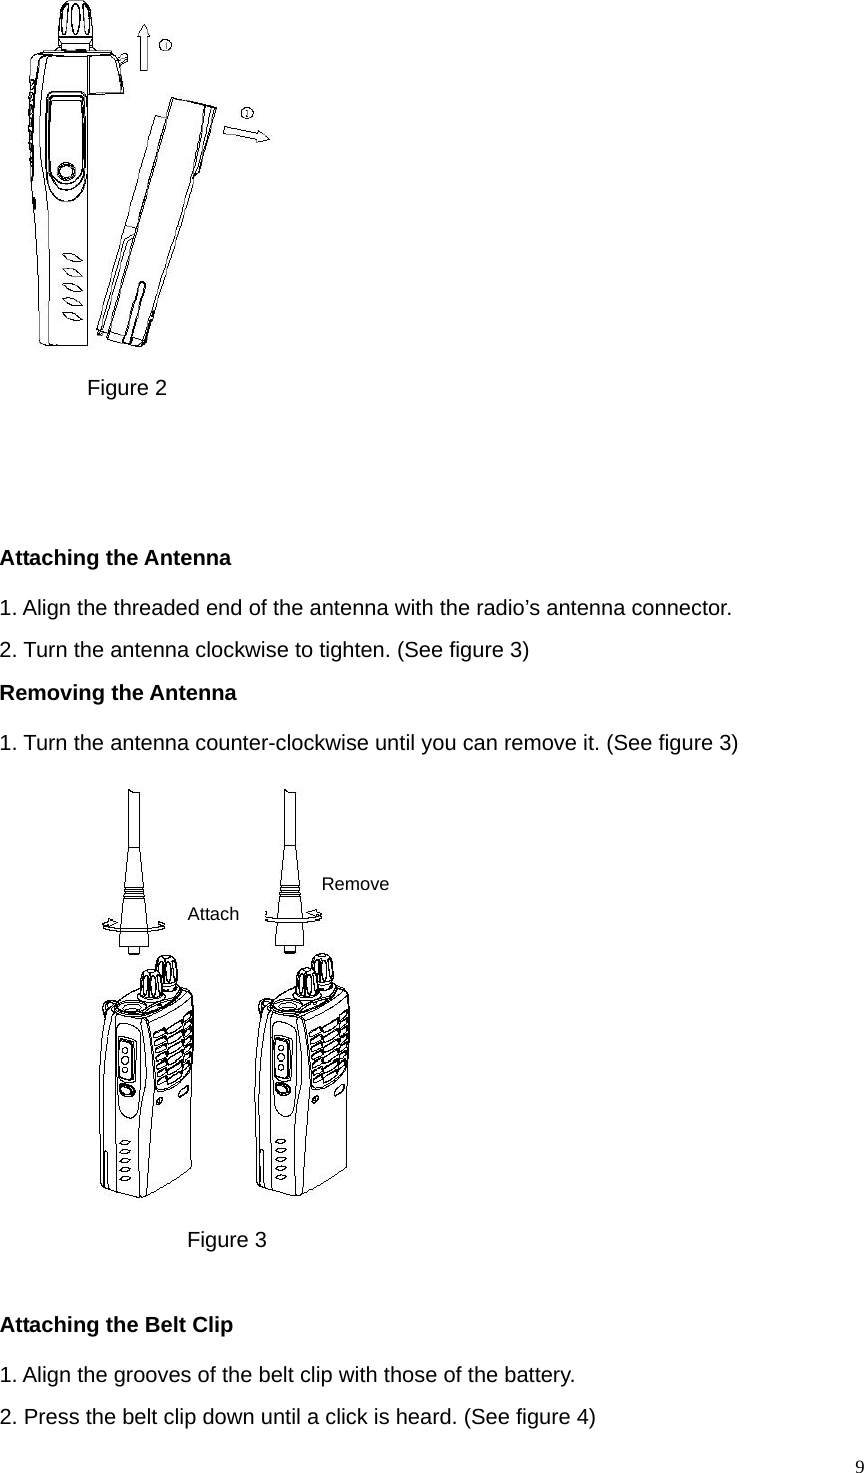   9       Figure 2    Attaching the Antenna 1. Align the threaded end of the antenna with the radio’s antenna connector. 2. Turn the antenna clockwise to tighten. (See figure 3) Removing the Antenna   1. Turn the antenna counter-clockwise until you can remove it. (See figure 3)   Attach Remove              Figure 3                           Attaching the Belt Clip 1. Align the grooves of the belt clip with those of the battery.                   2. Press the belt clip down until a click is heard. (See figure 4) 